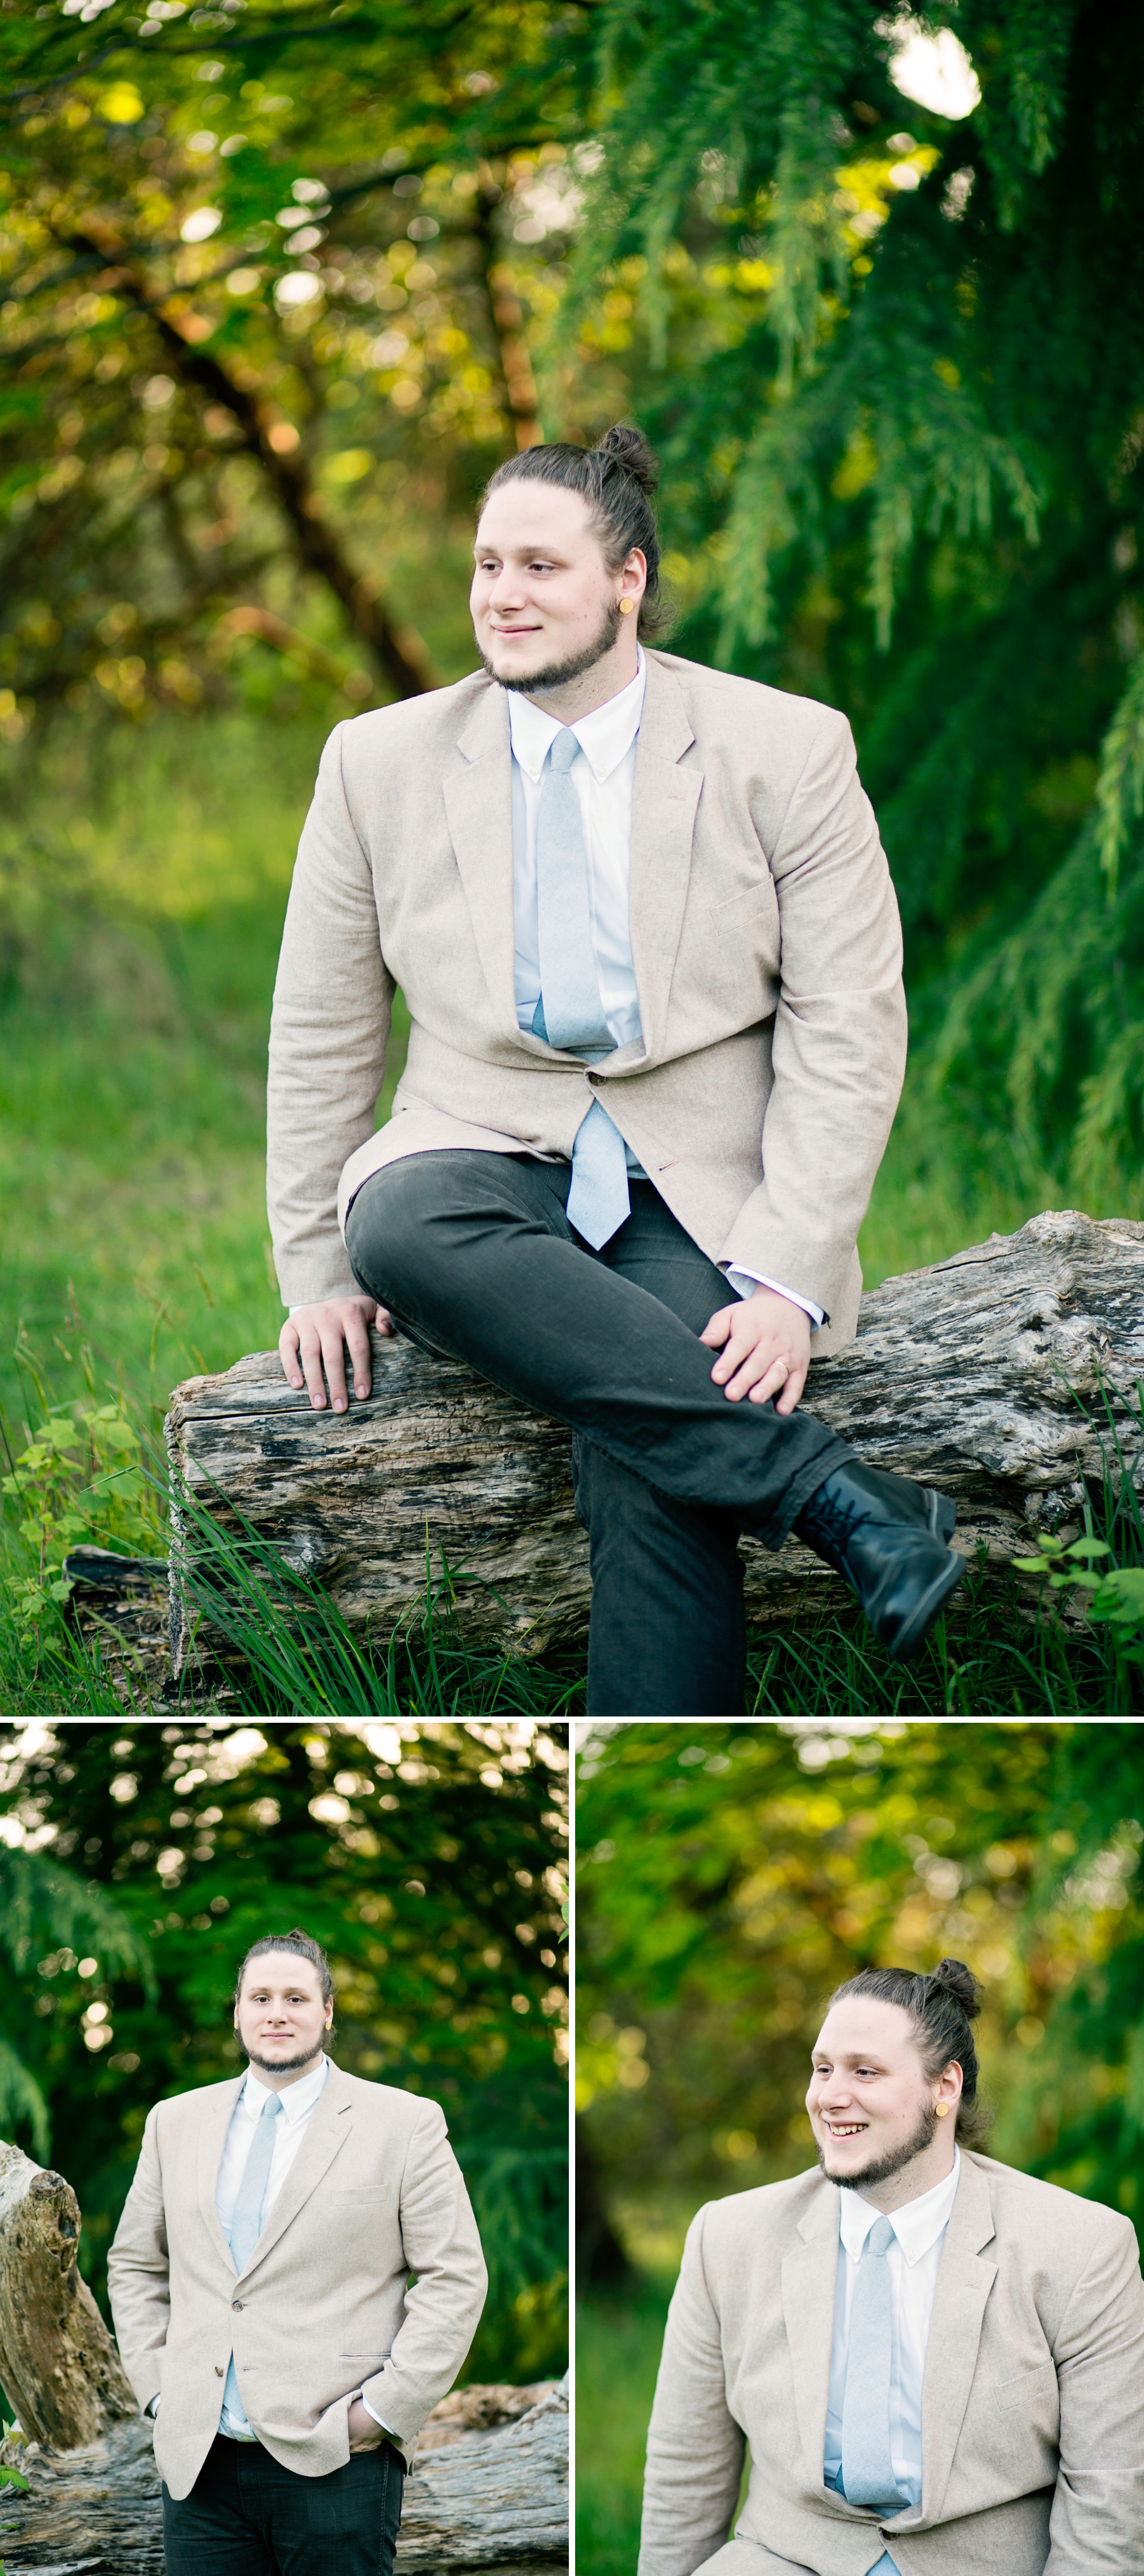 23-Groom-Portraits-Married-Discovery-Park-Elopement-Seattle-Photographer-Wedding-Photography-by-Betty-Elaine